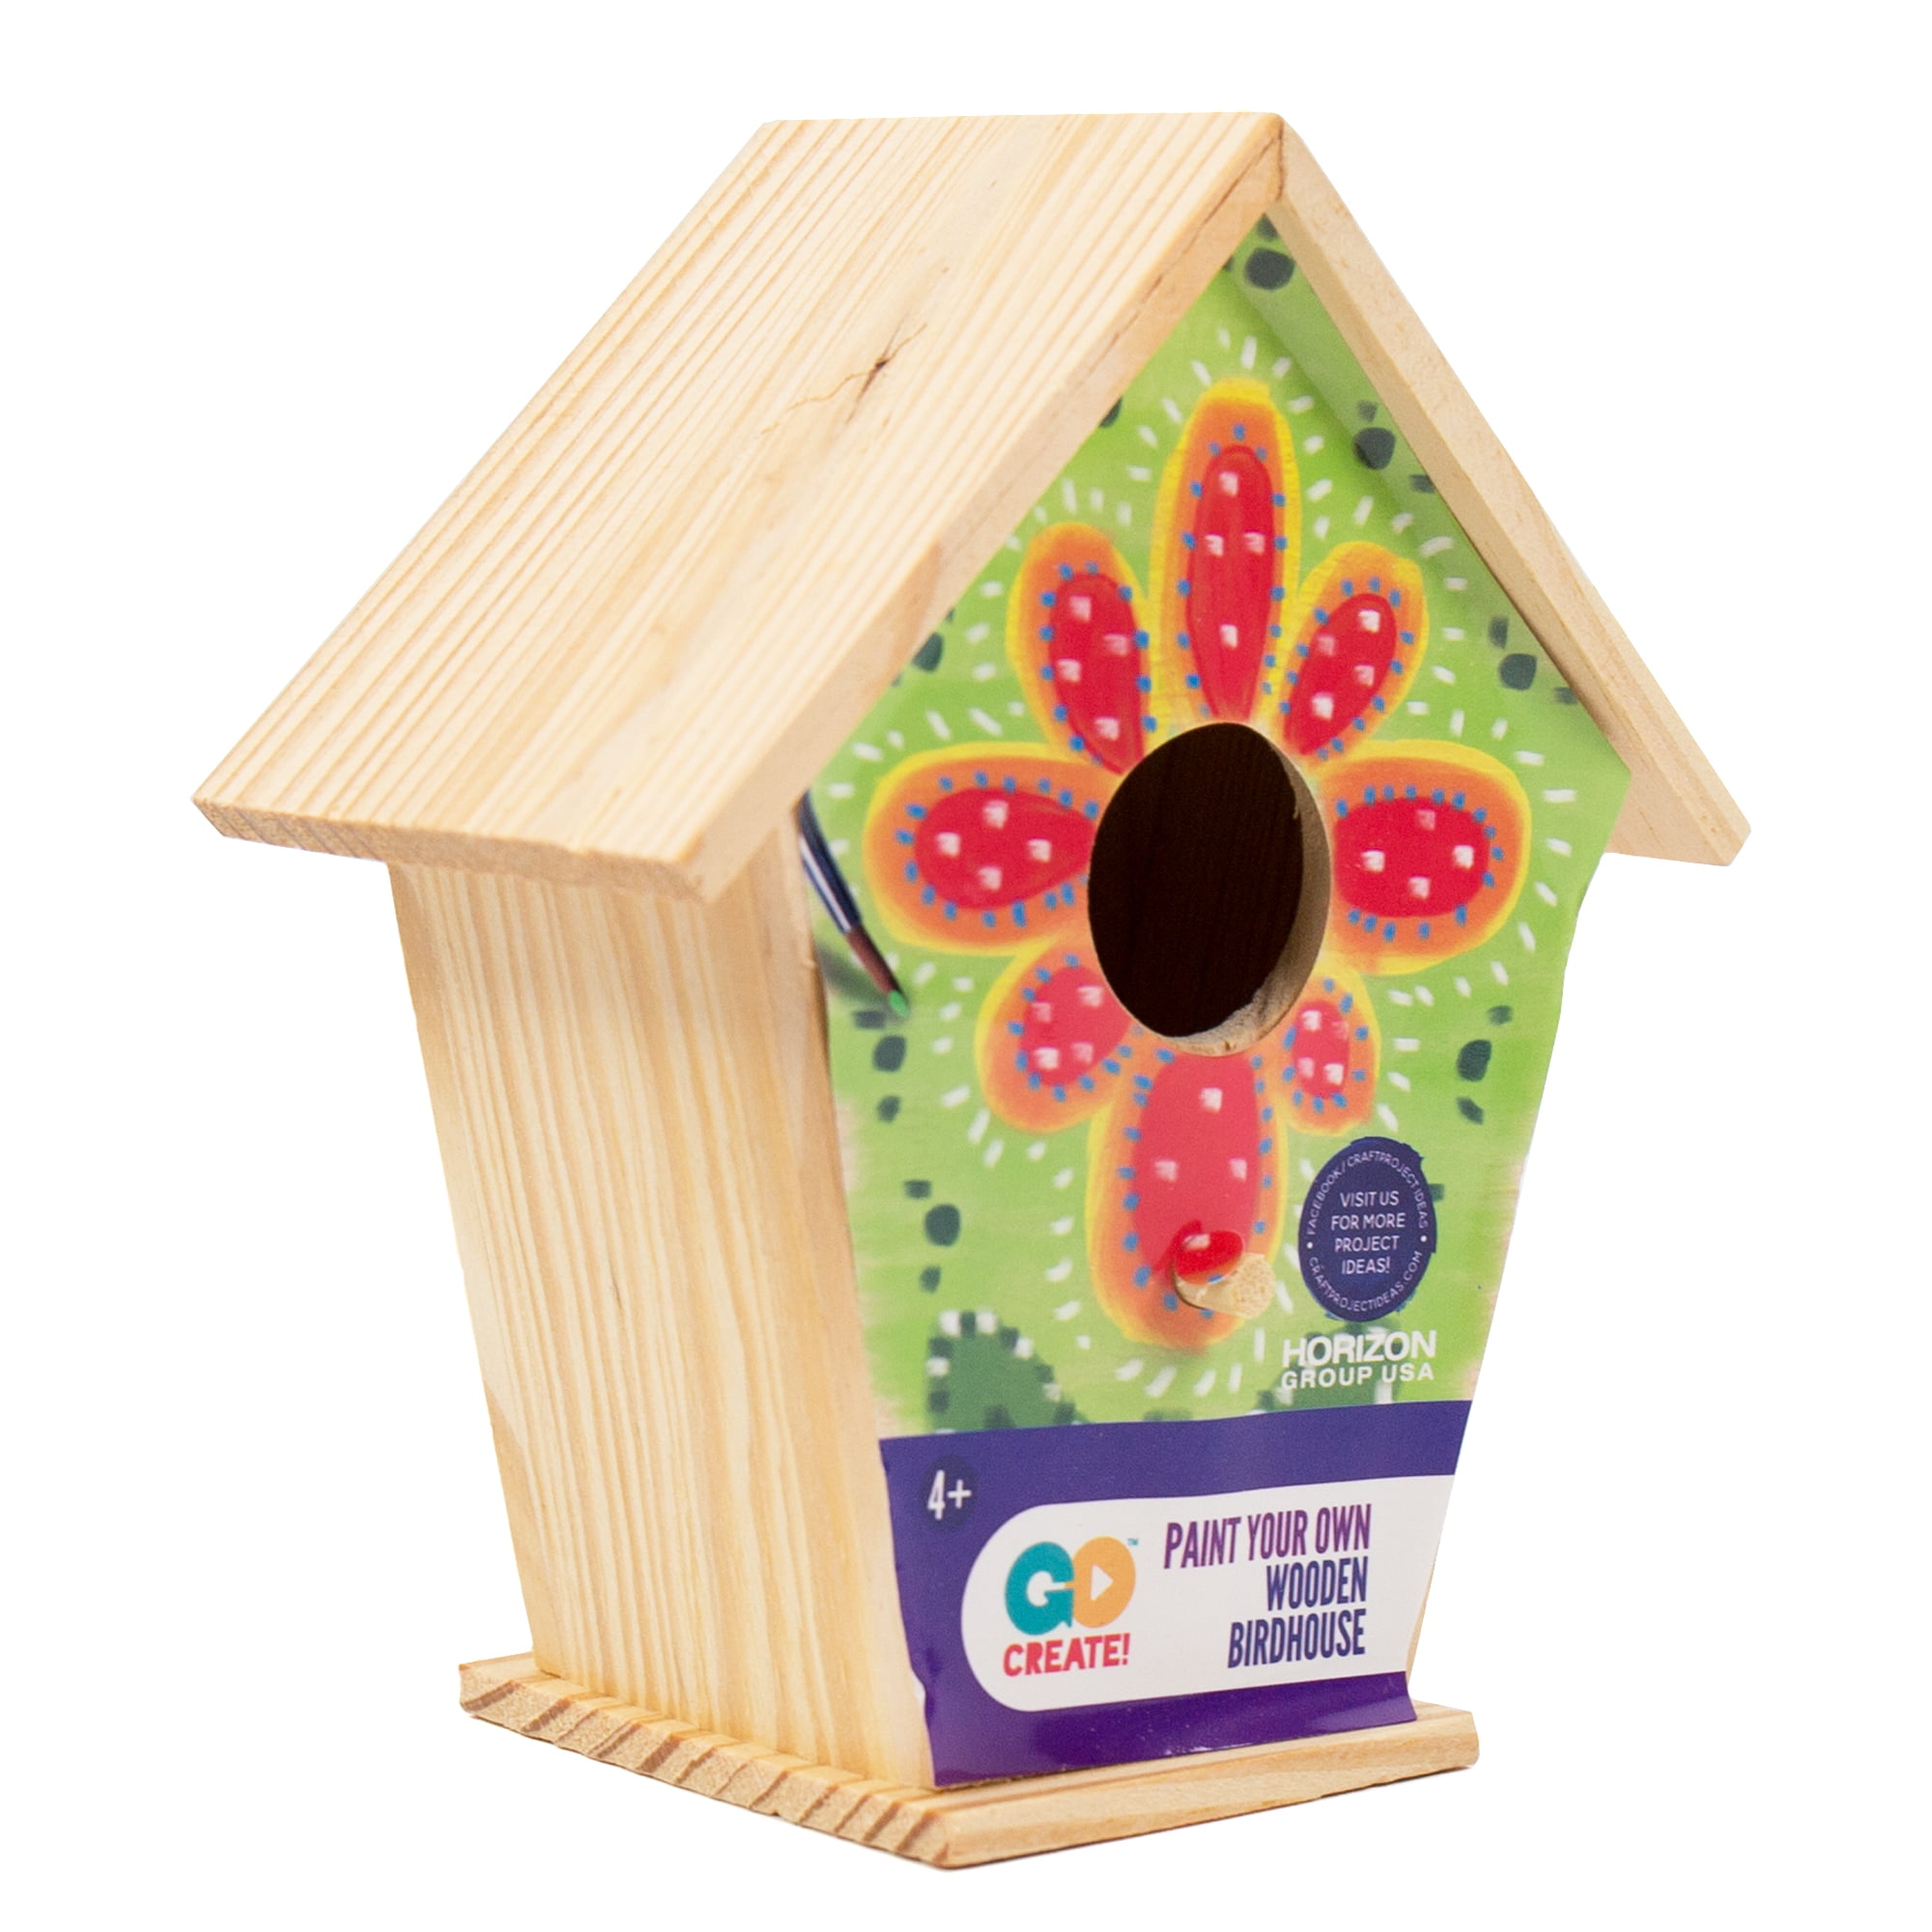 Build Your Own My Window Birdhouse KIT USA MADE! PERFECT FOR EASTER BASKETS 